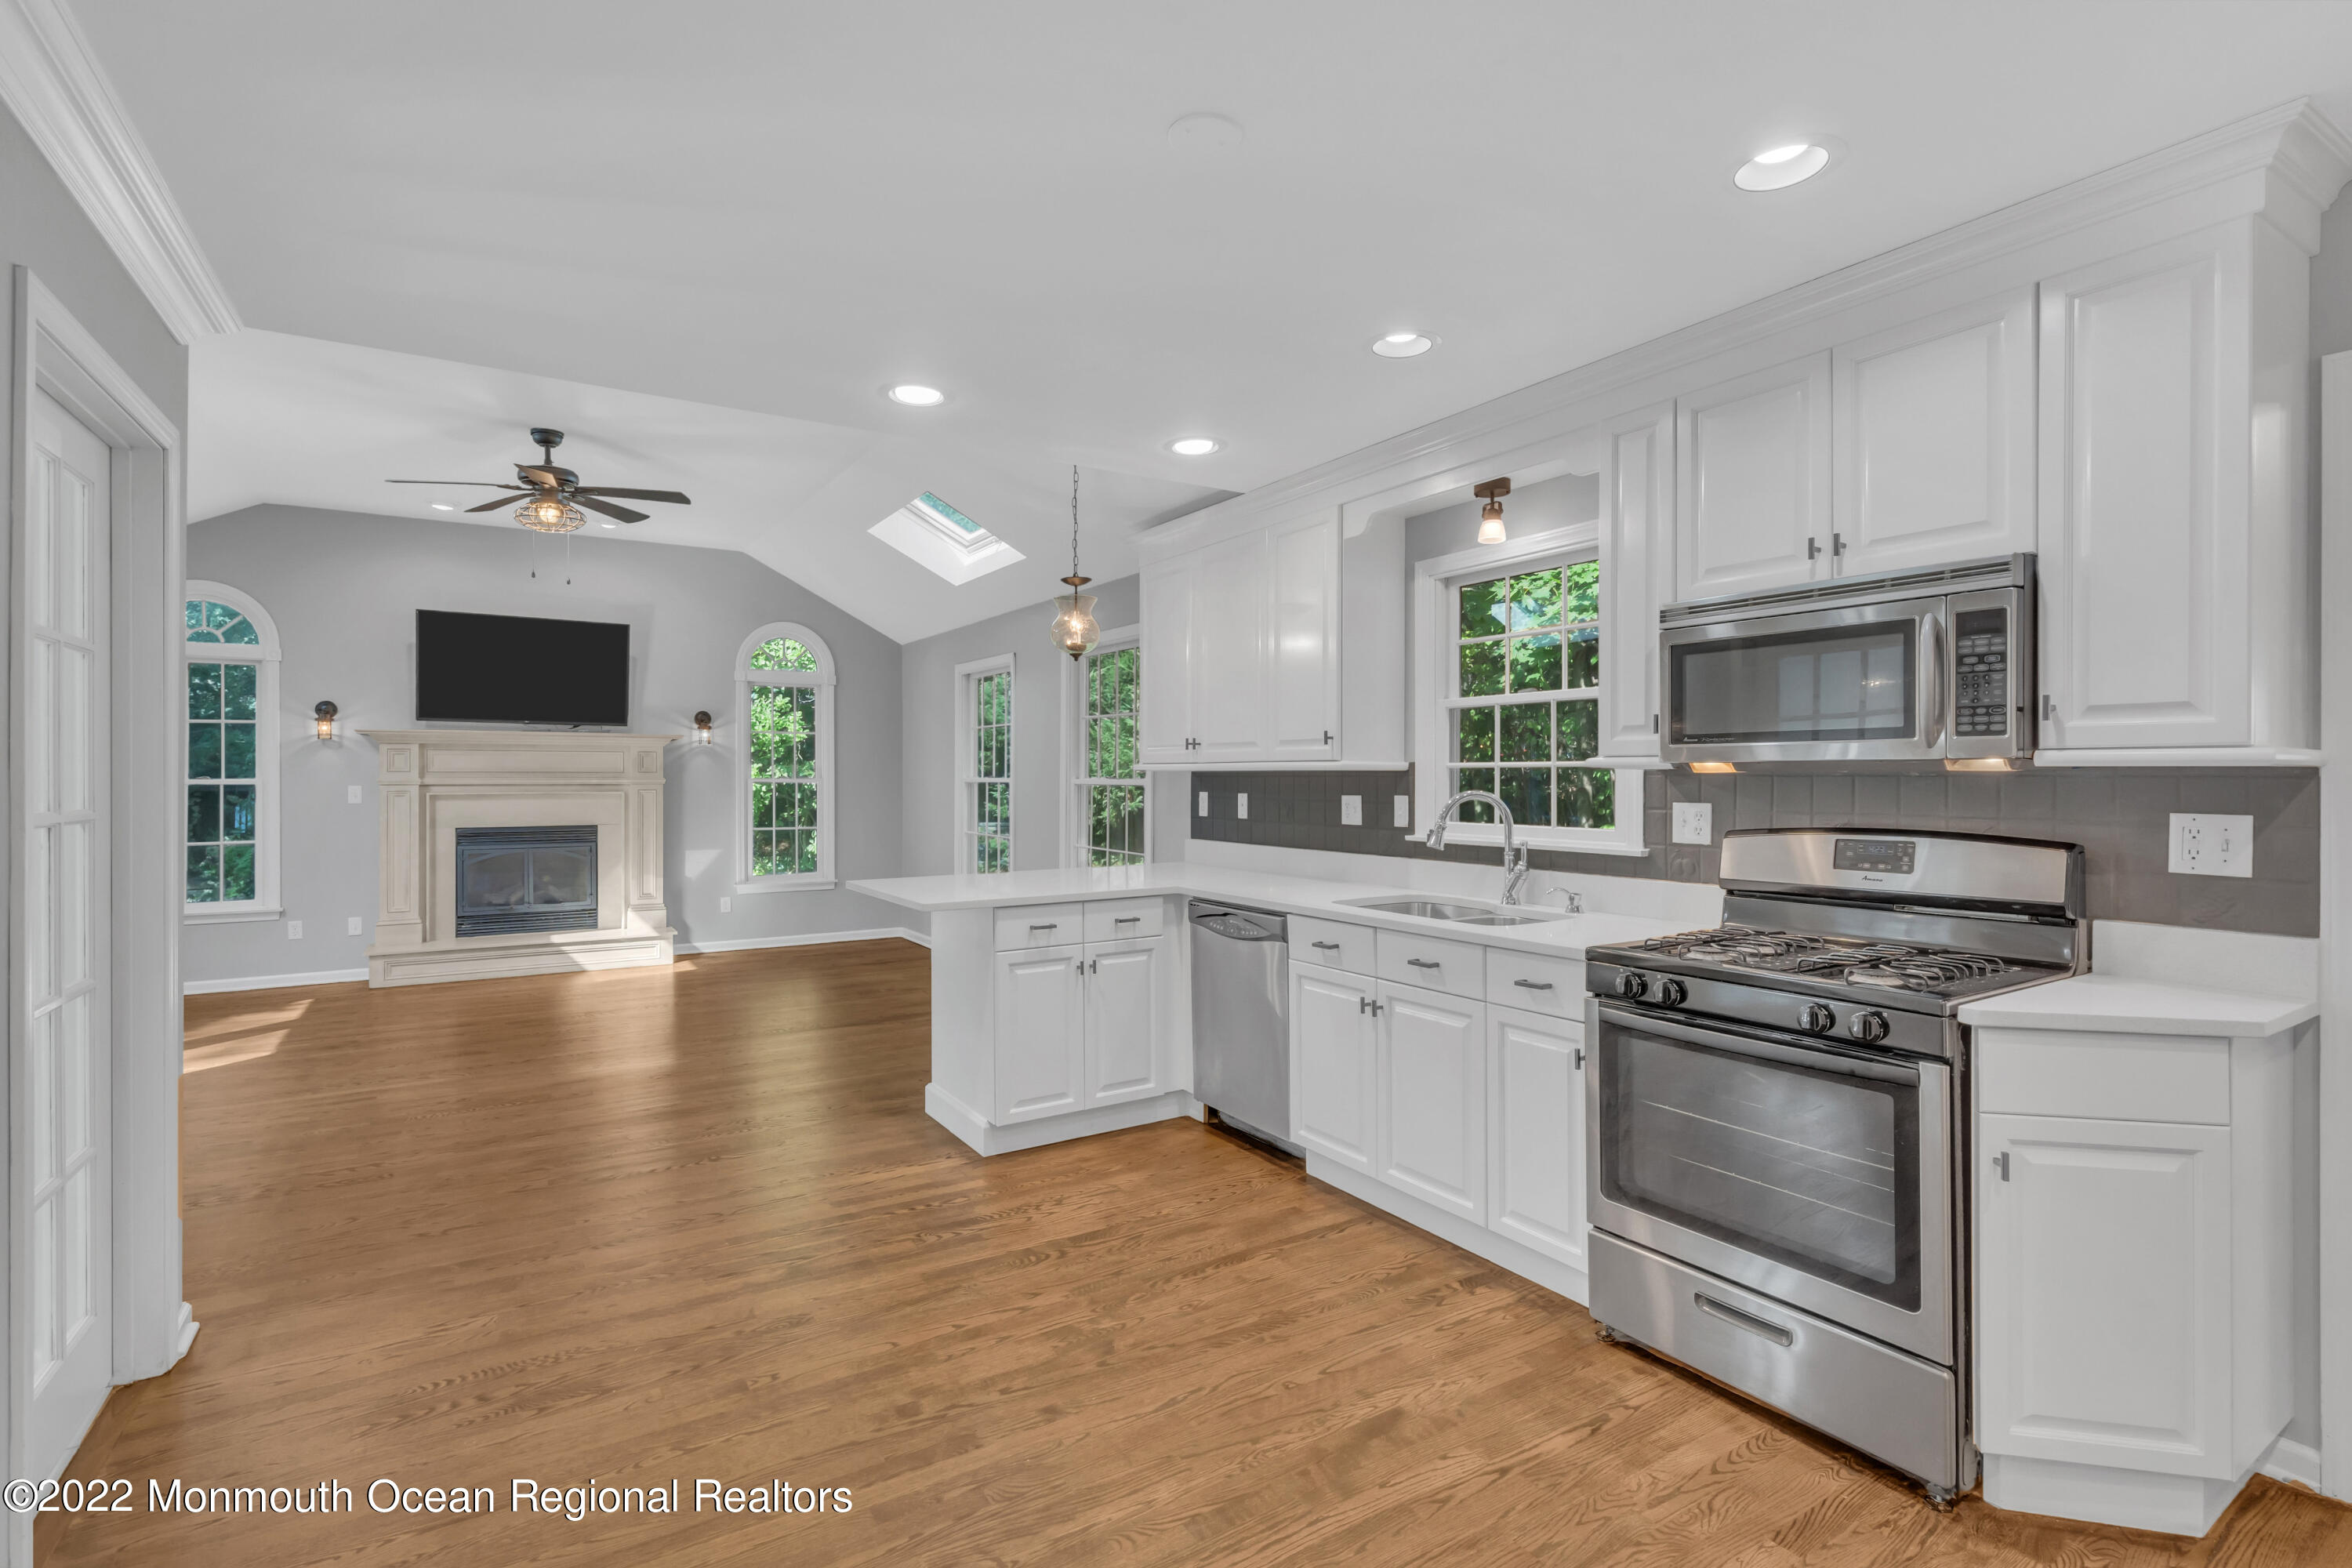 a large kitchen with cabinets wooden floor and stainless steel appliances